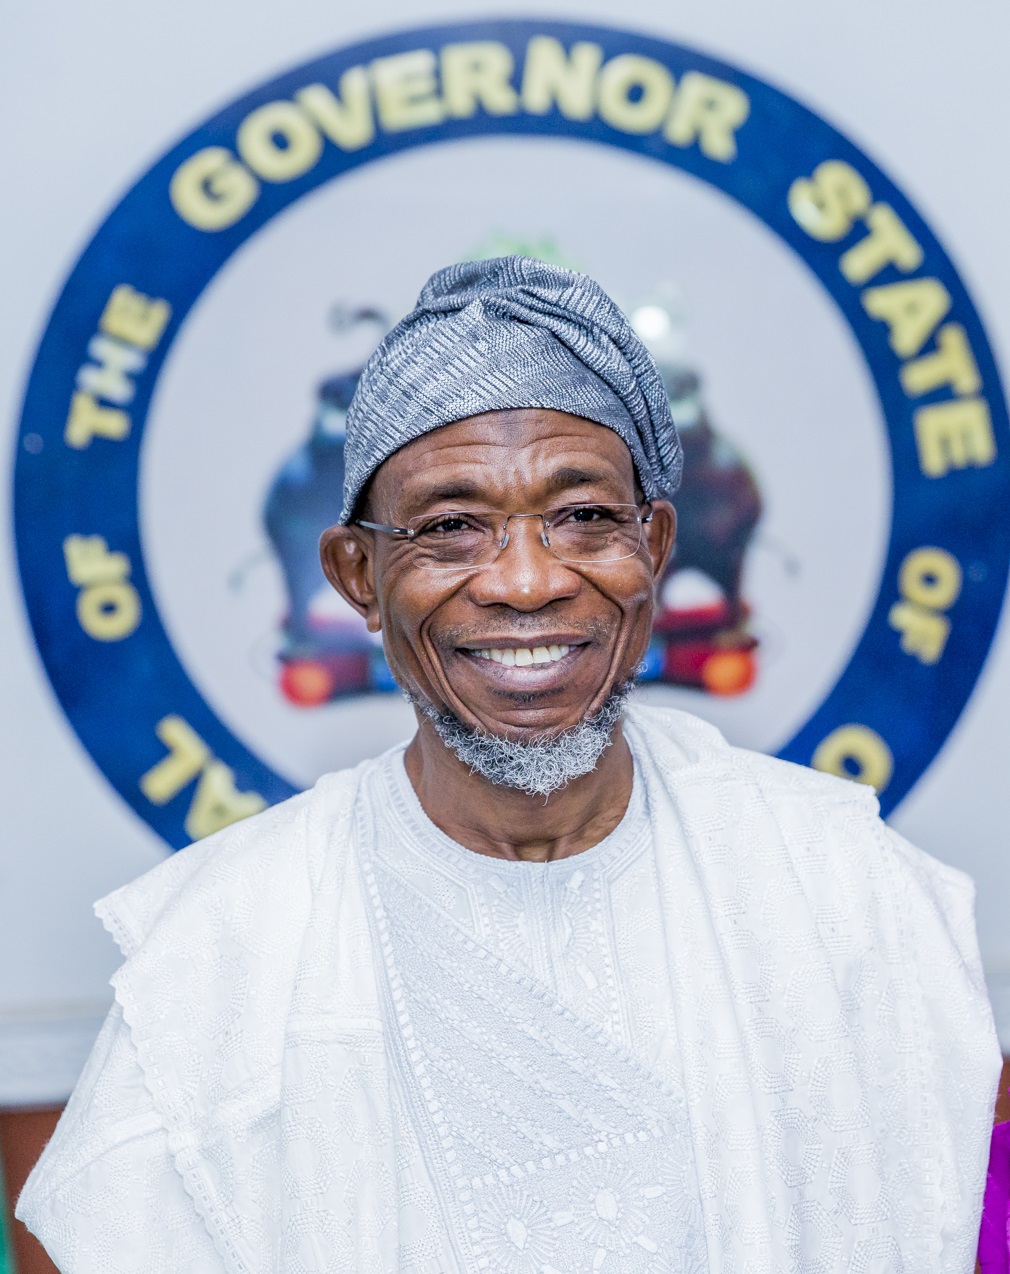 Aregbesola Pays N40m Compensation To Persons Affected By Road Construction